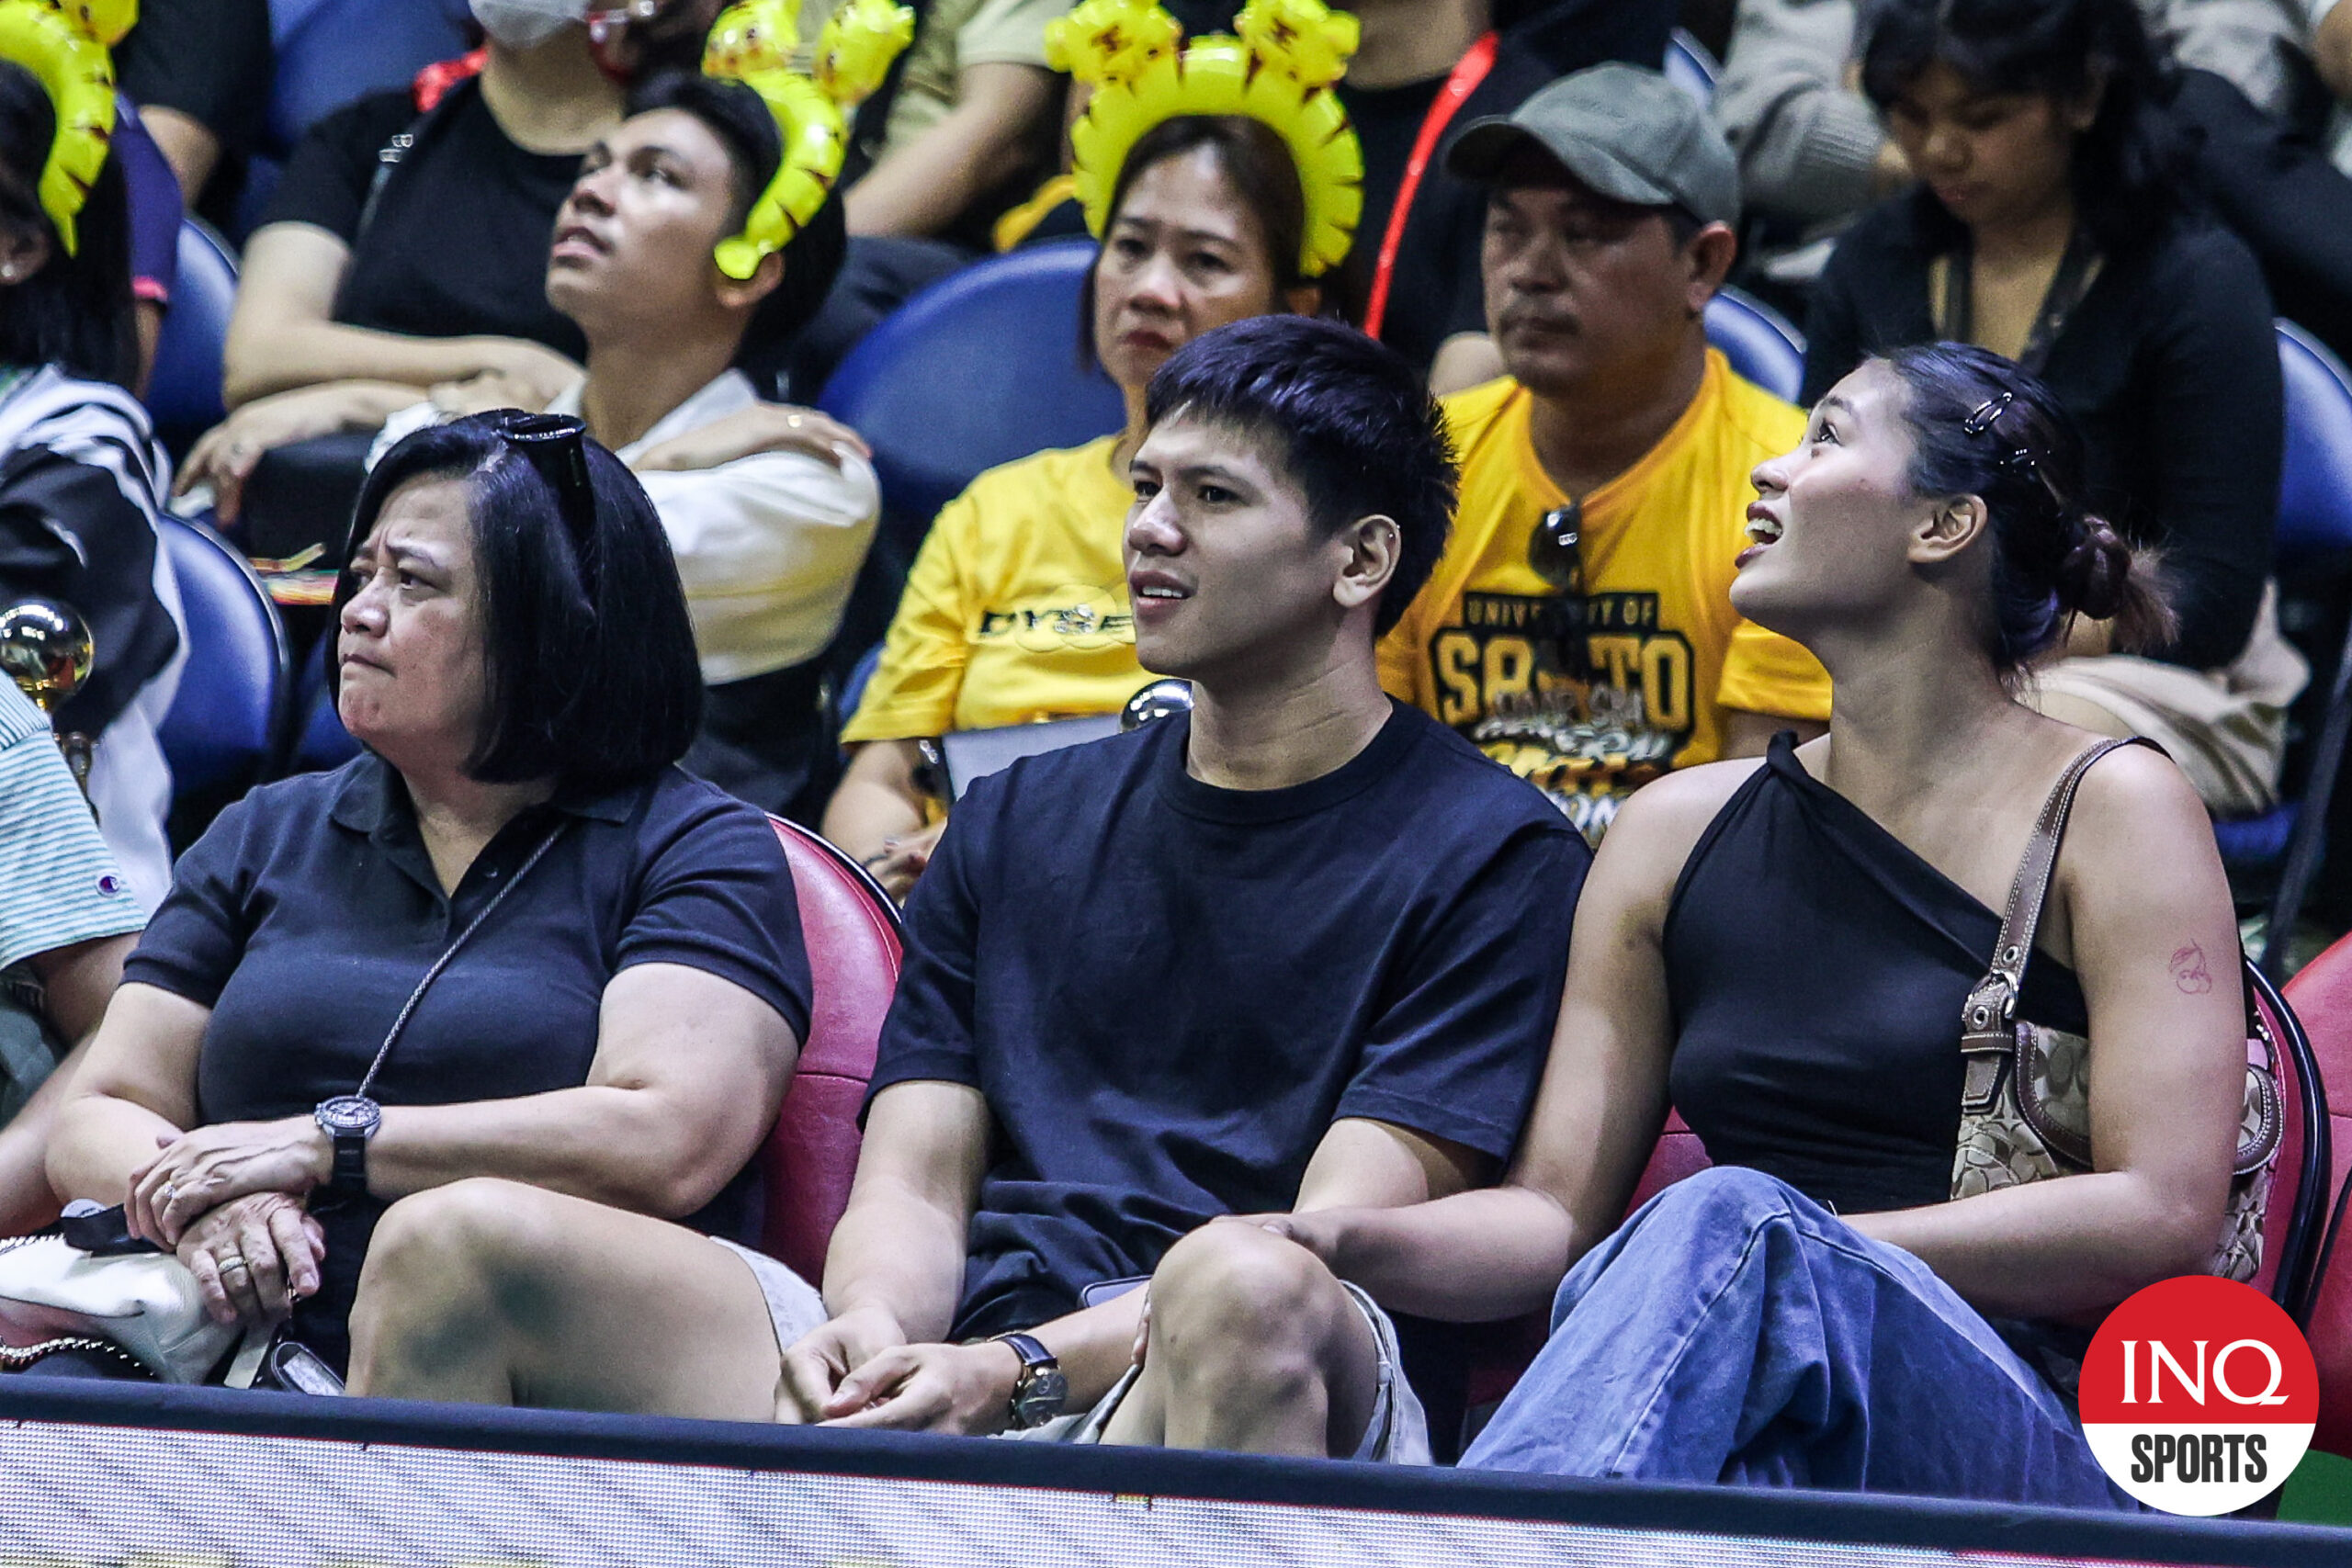 Former UST Golden Spikers' star Jau Umandal watching the UAAP men's volleyball Finals game between NU and UST.